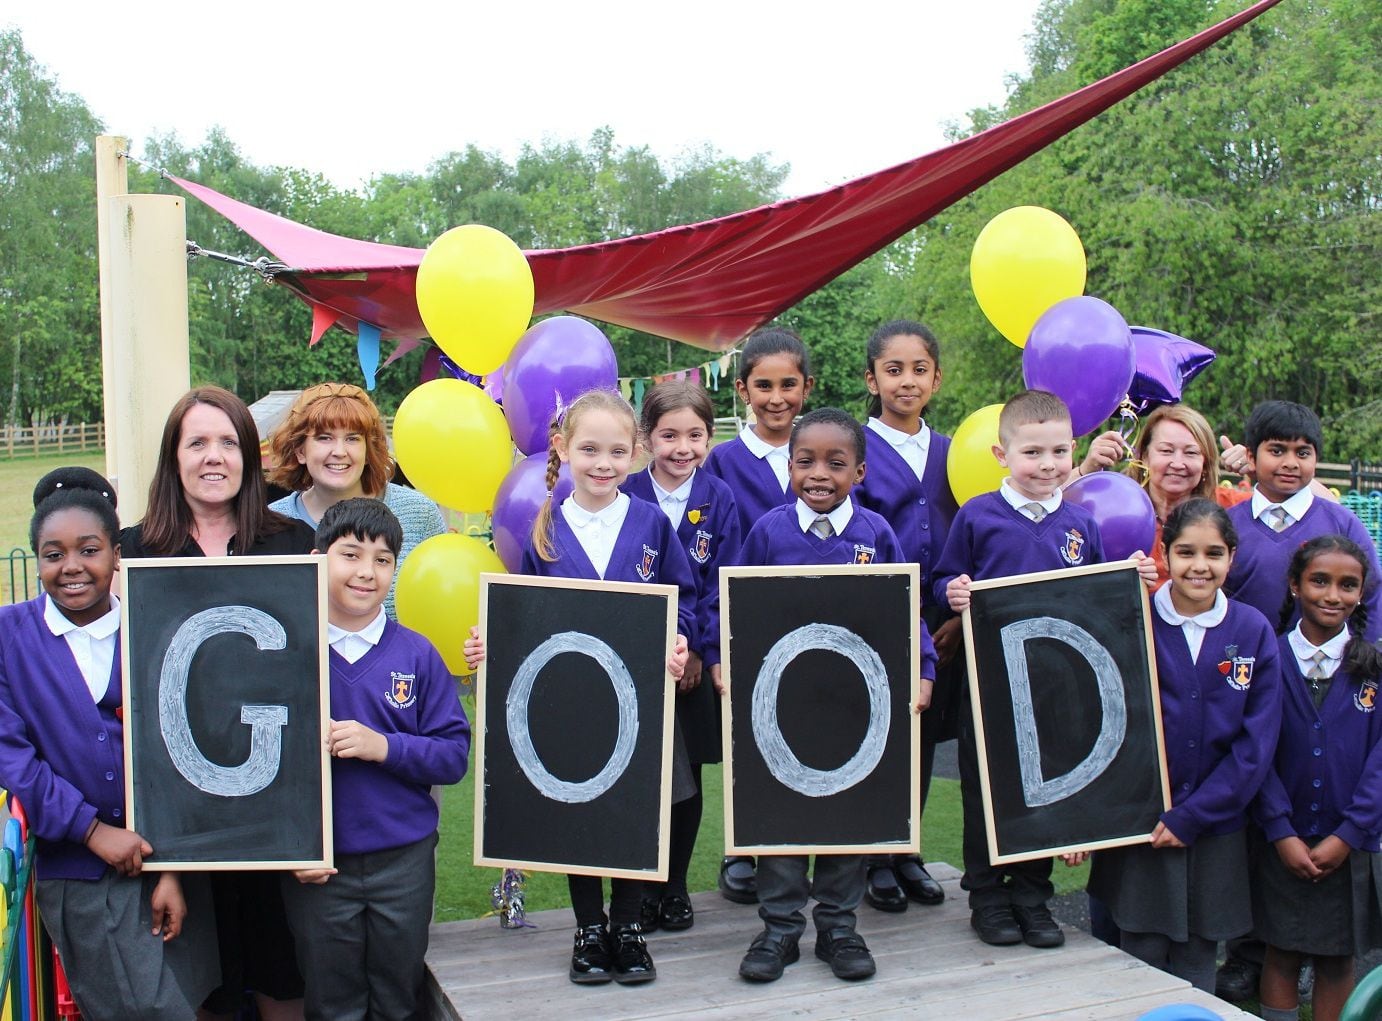 Celebrations as Wolverhampton school jumps from 'requires improvement' to 'good' after latest Ofsted inspection